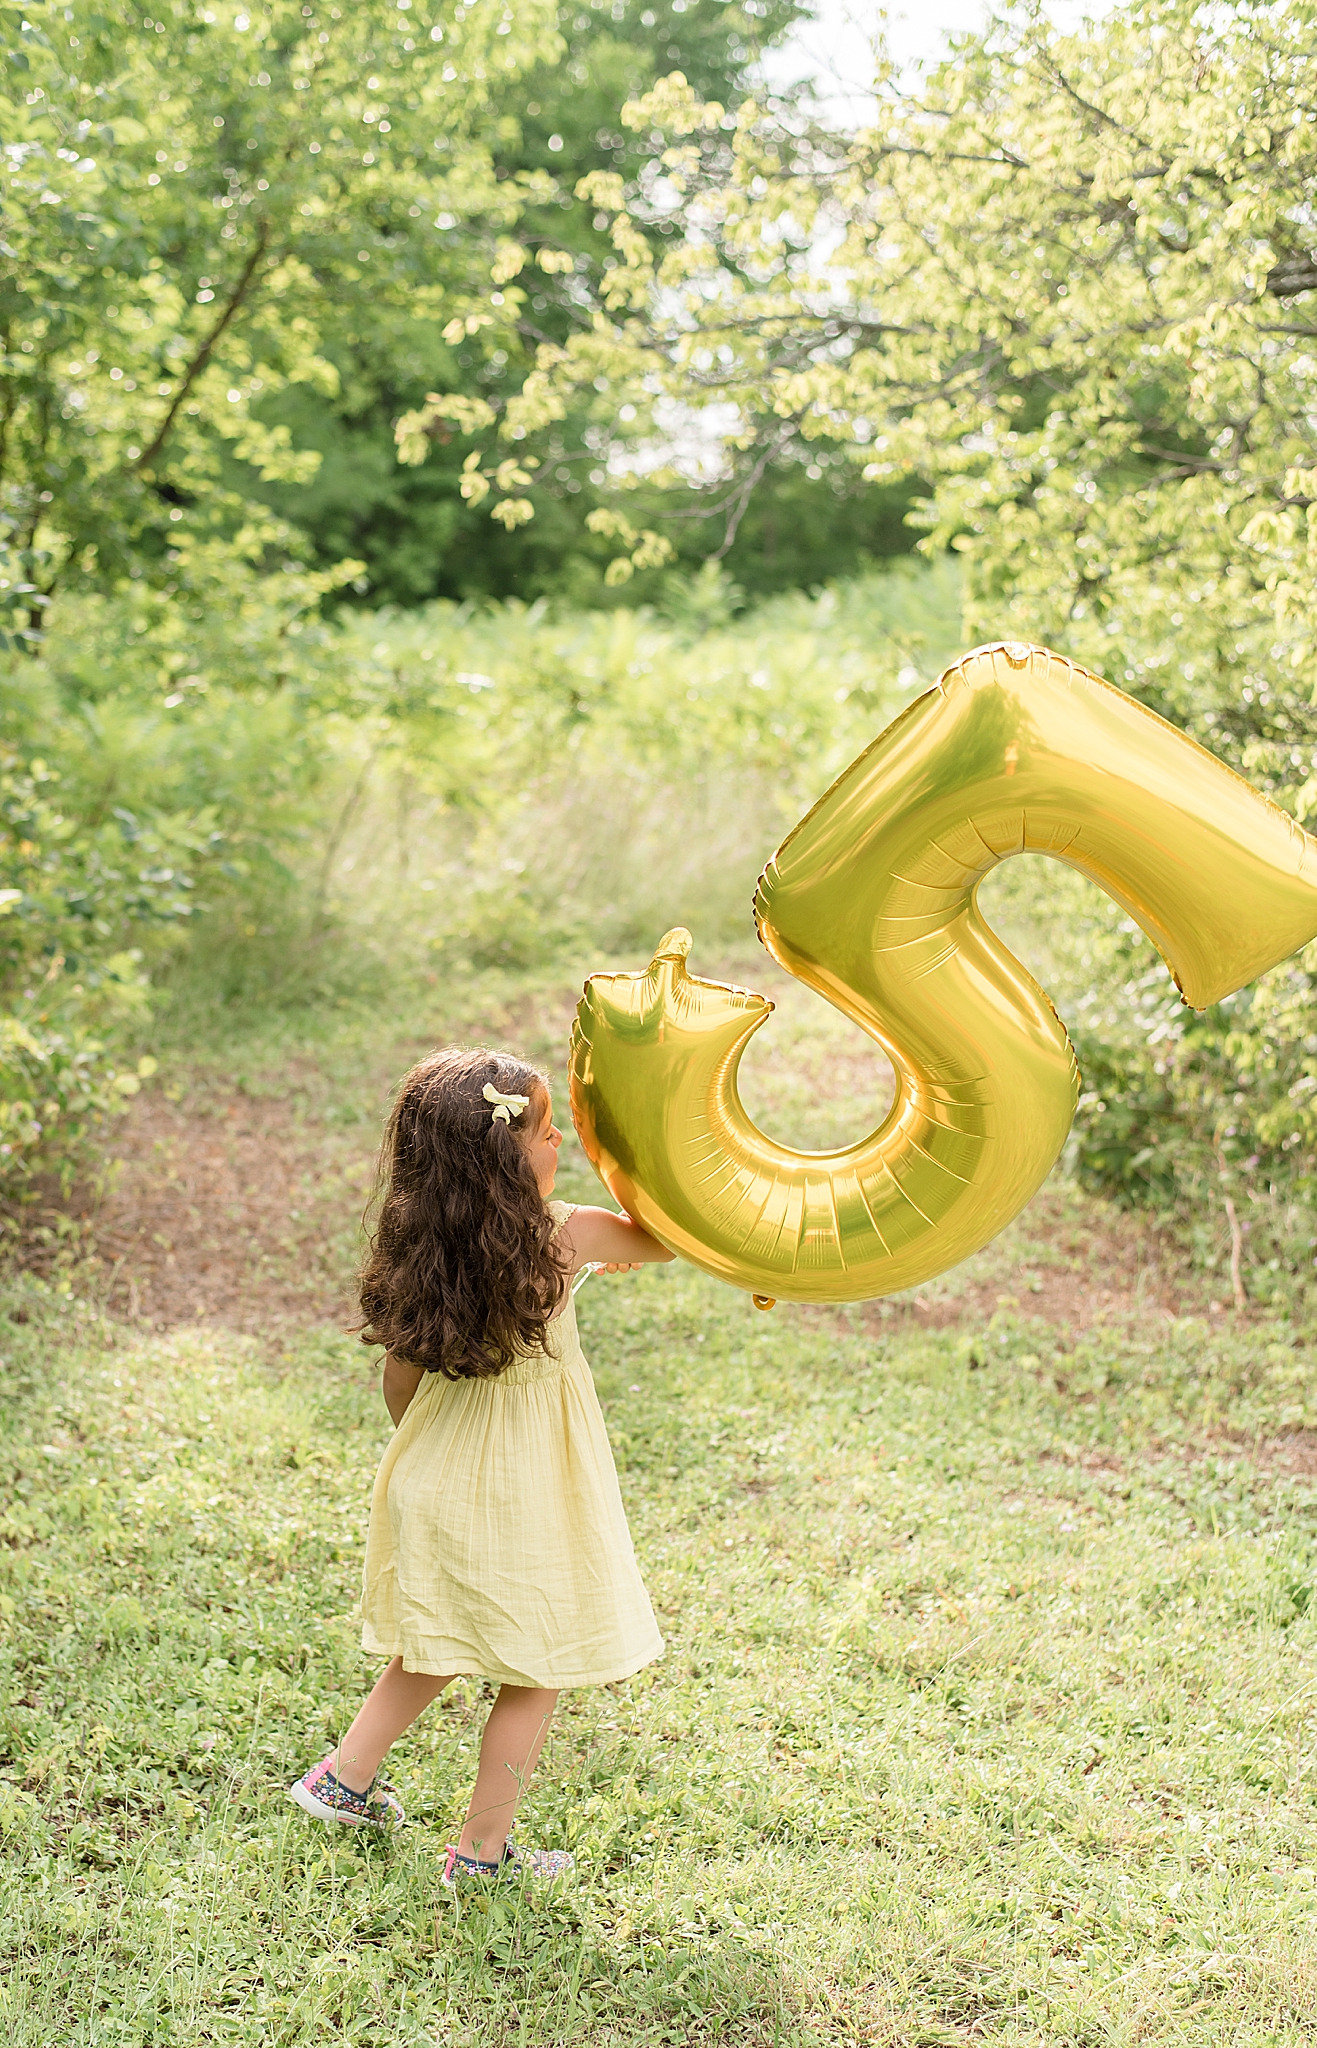 five year old walks with golden 5 balloon